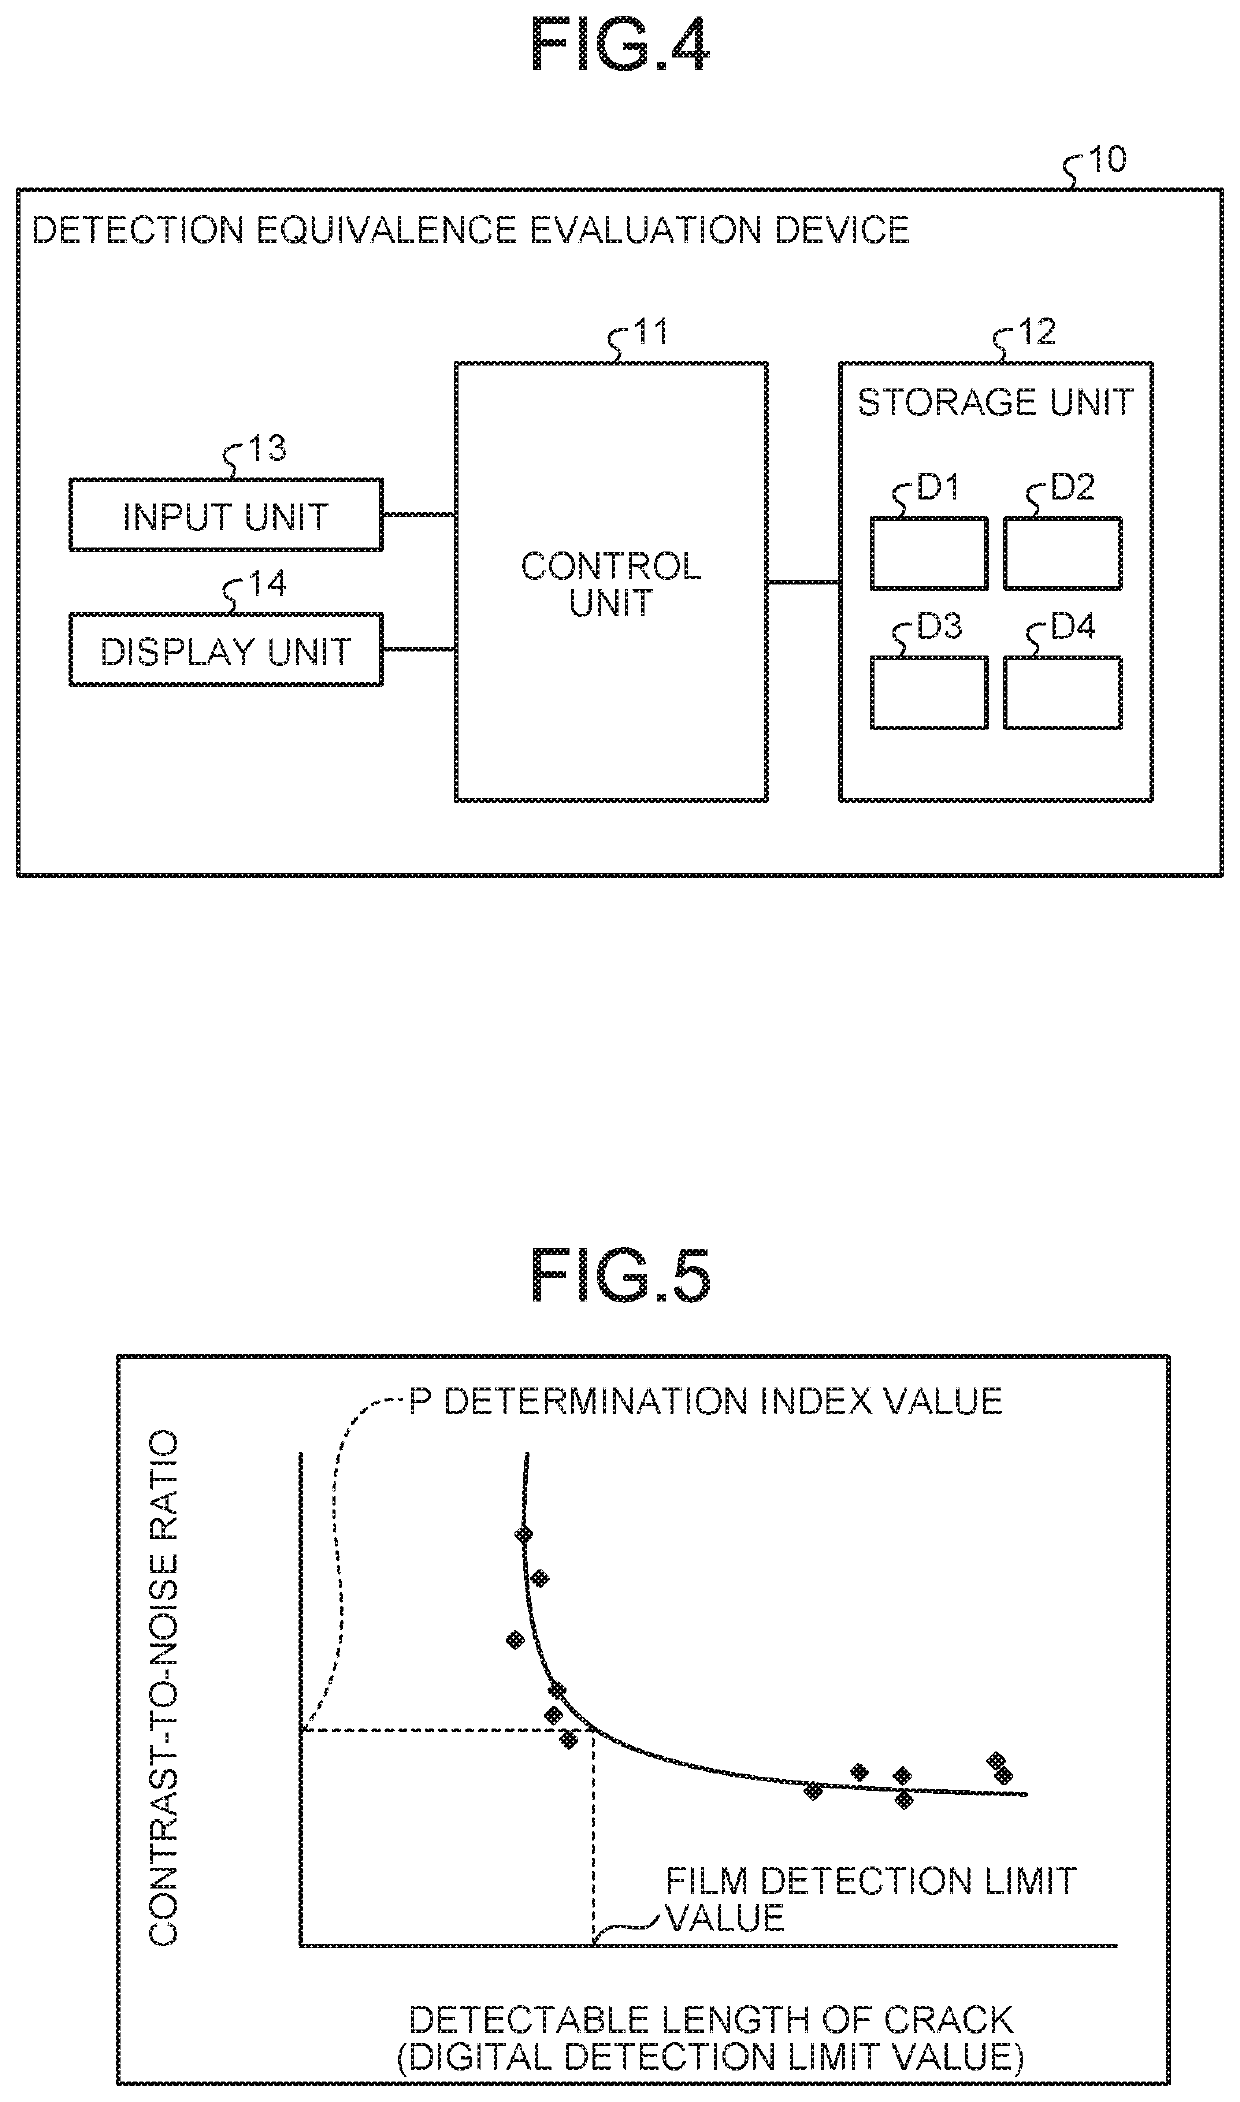 Detection equivalence evaluation method and detection equivalence evaluation device